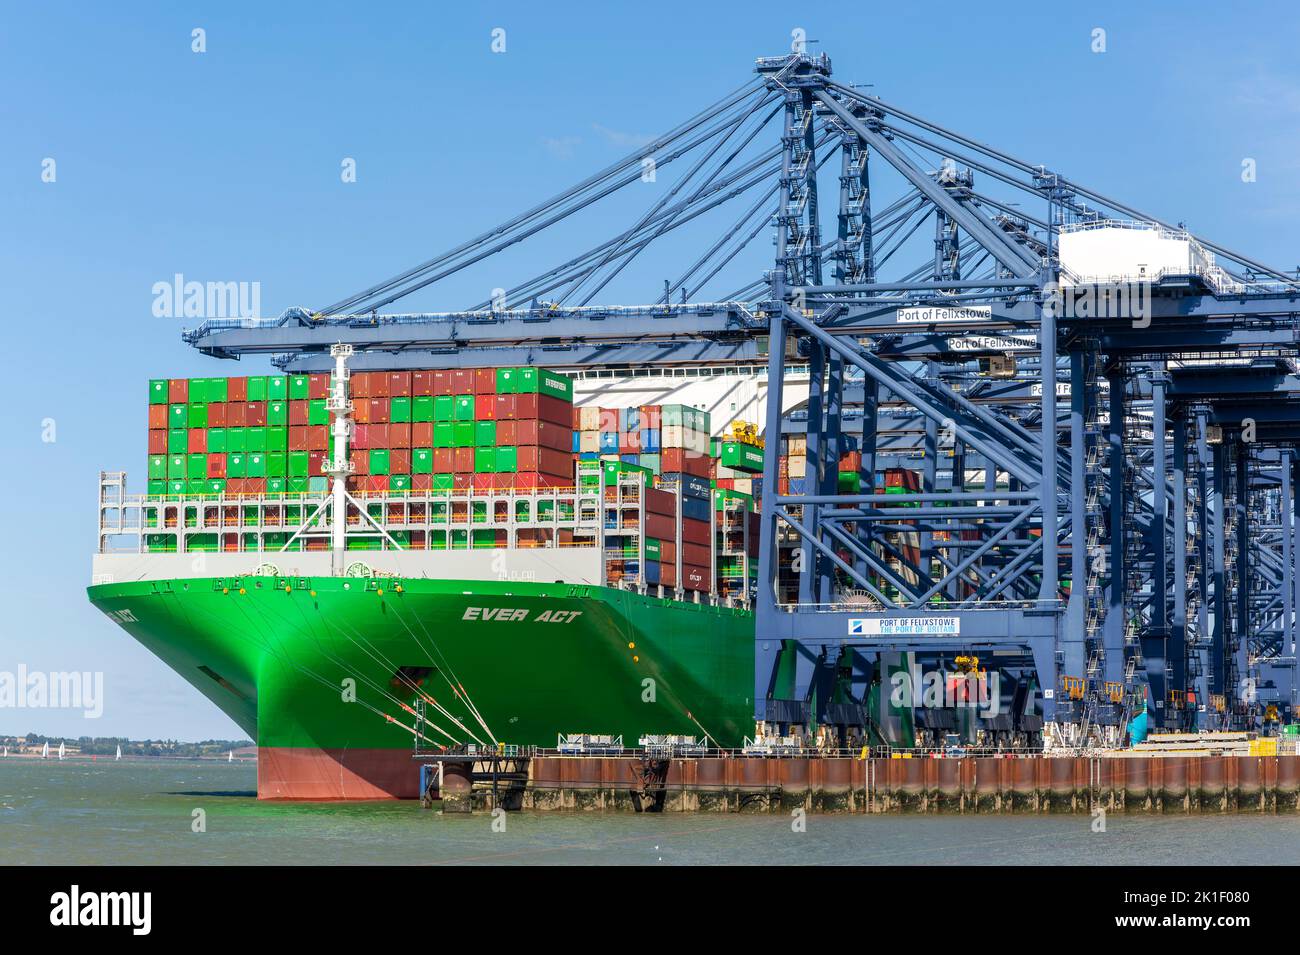 Evergreen Ever Act container ship and gantry cranes on quayside, Port of Felixstowe,  Suffolk,  England, UK Stock Photo